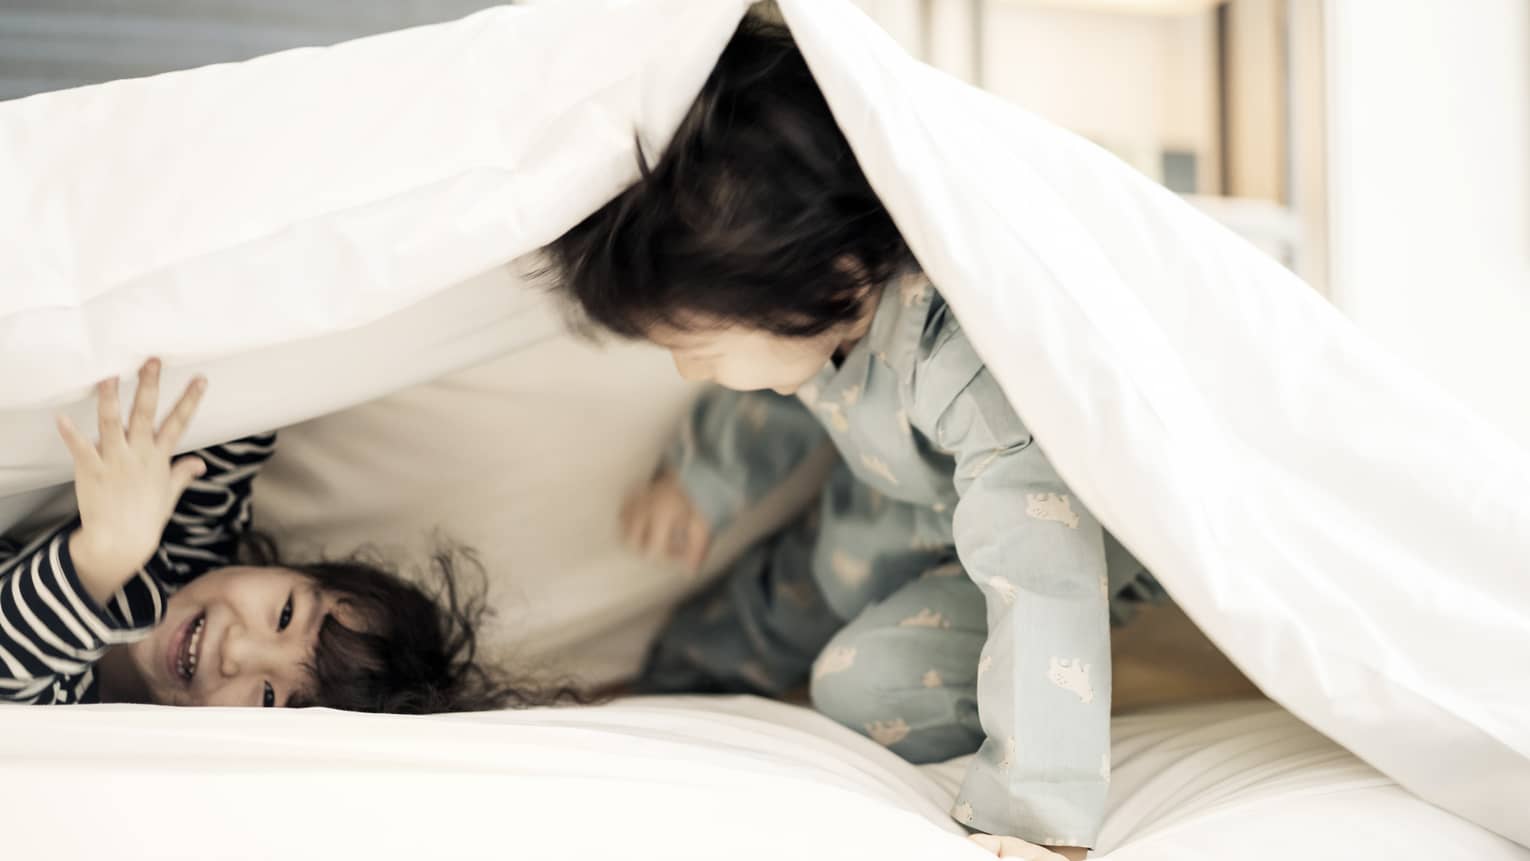 Two young children in pyjamas laugh, play under white blanket on bed